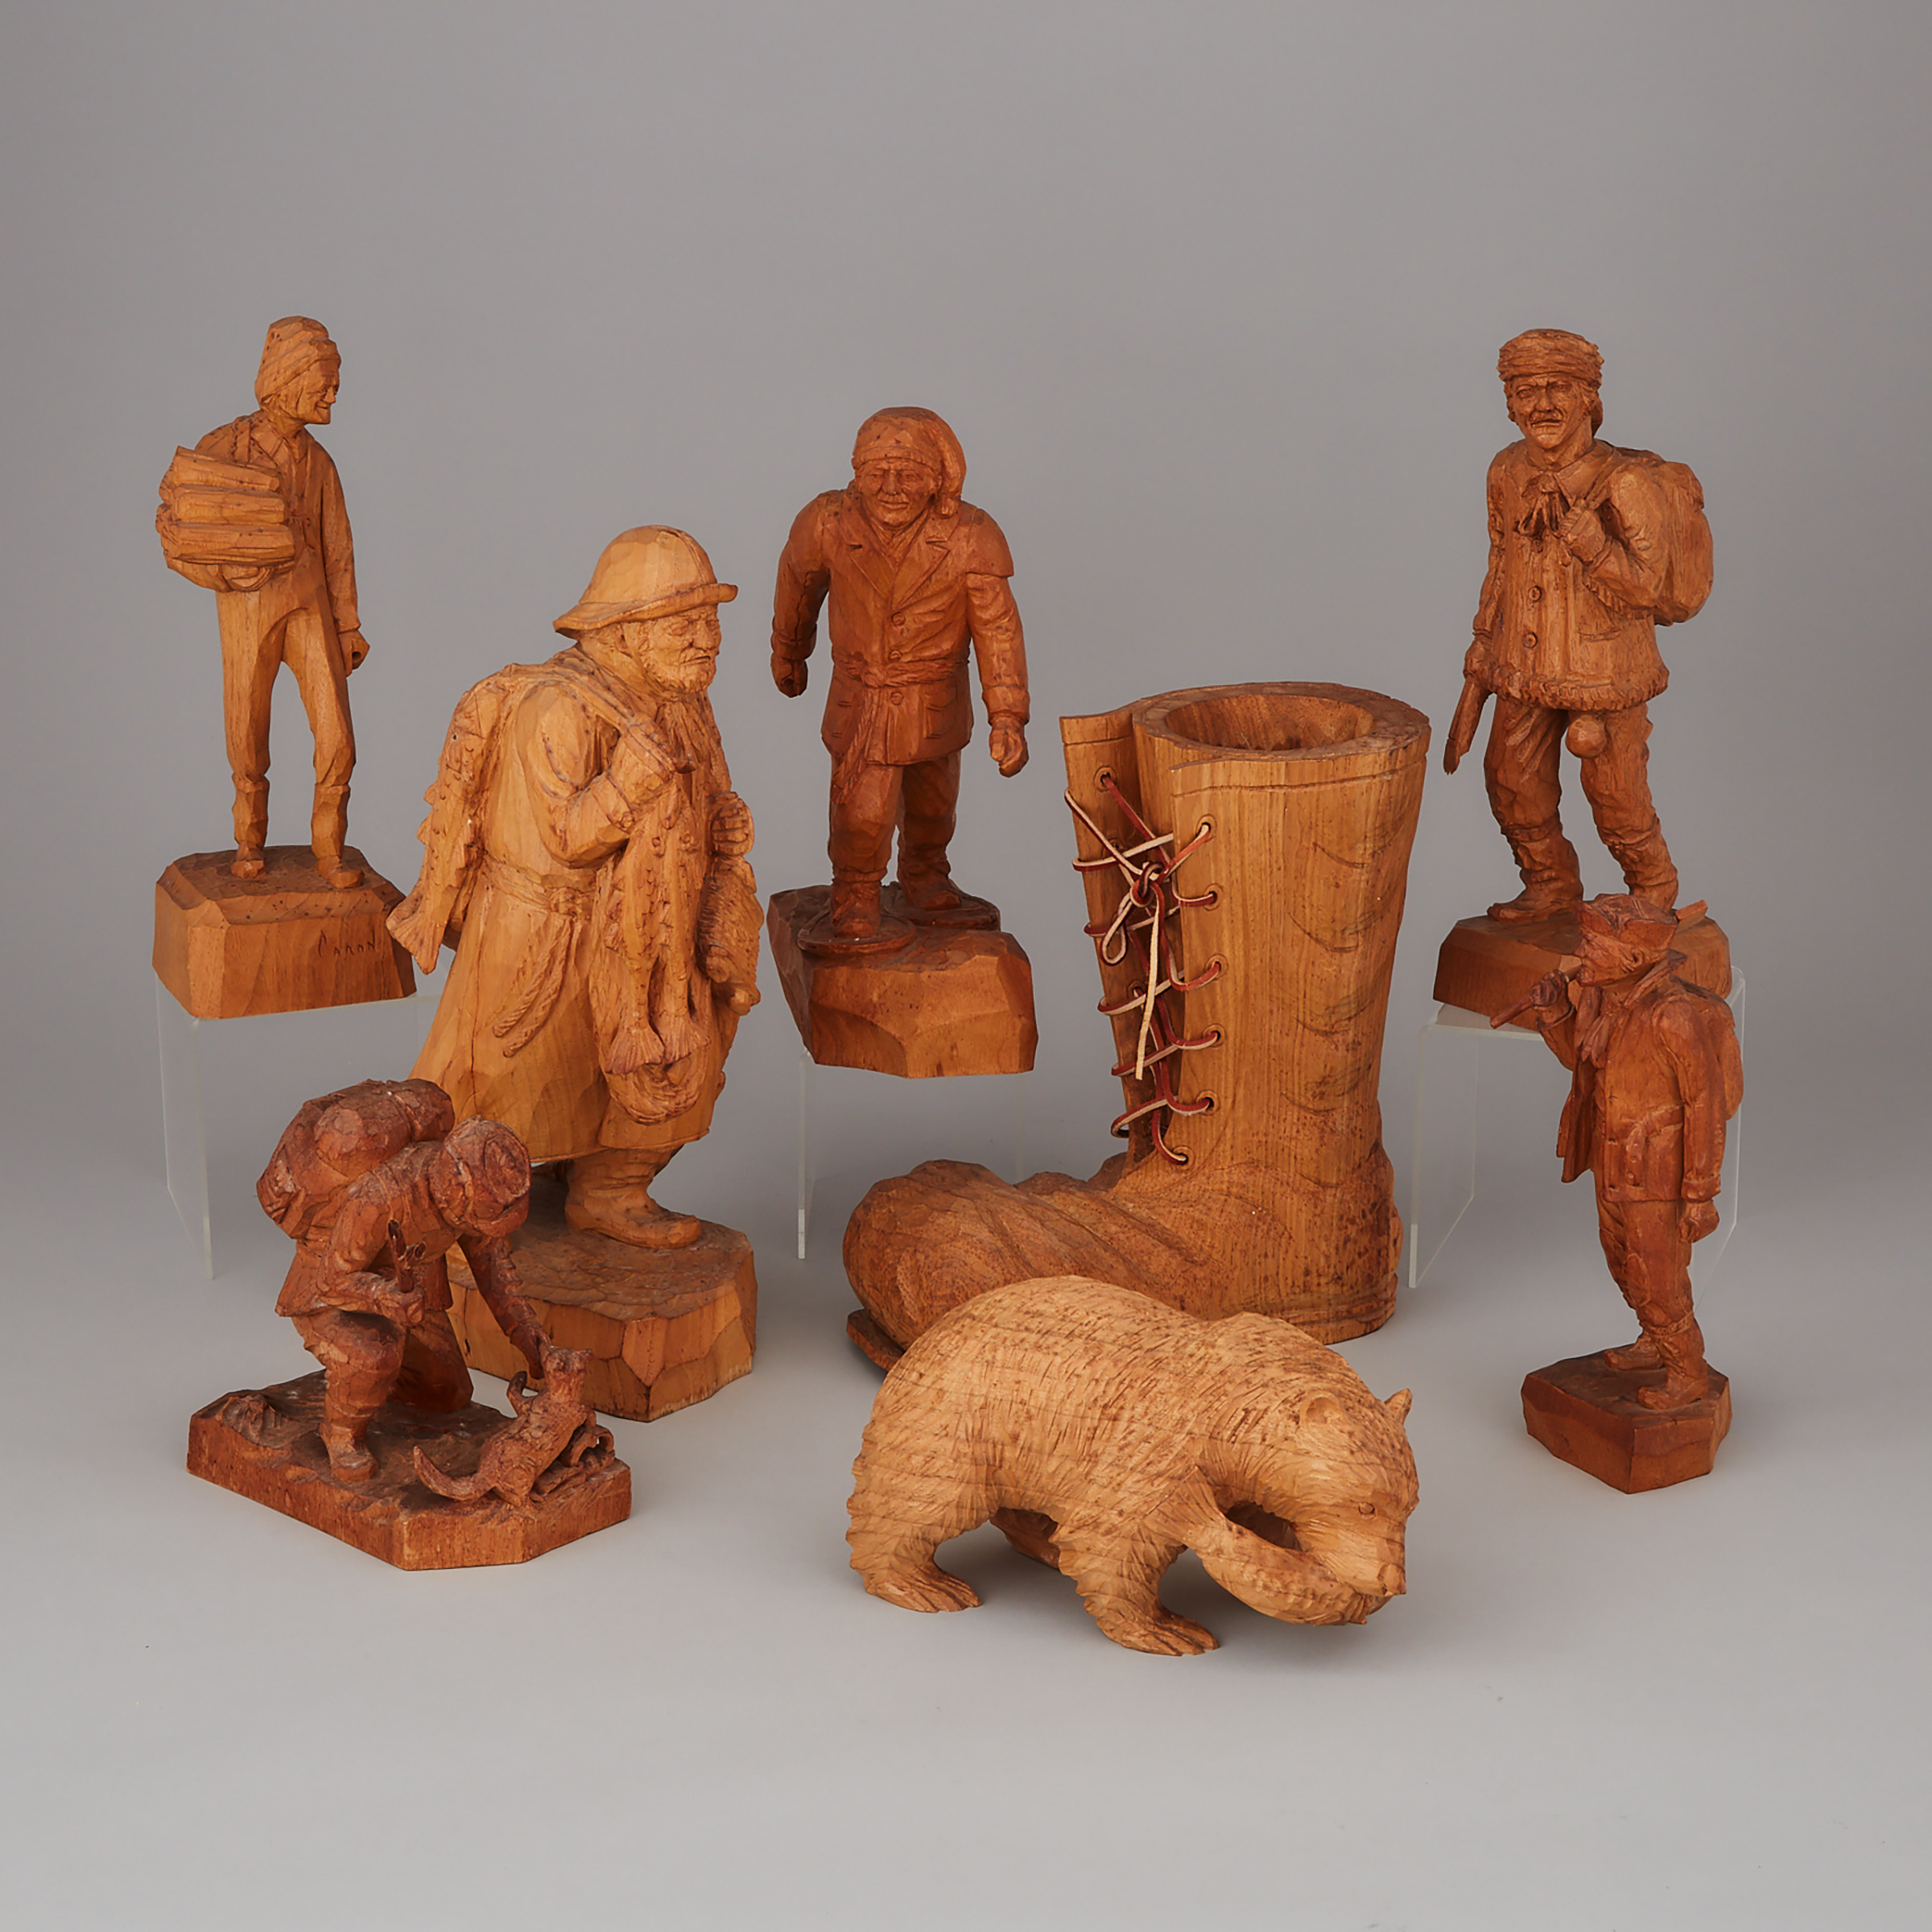 Collection of Saint-Jean-Port-Joli, Quebec, Carvings, mid 20th century